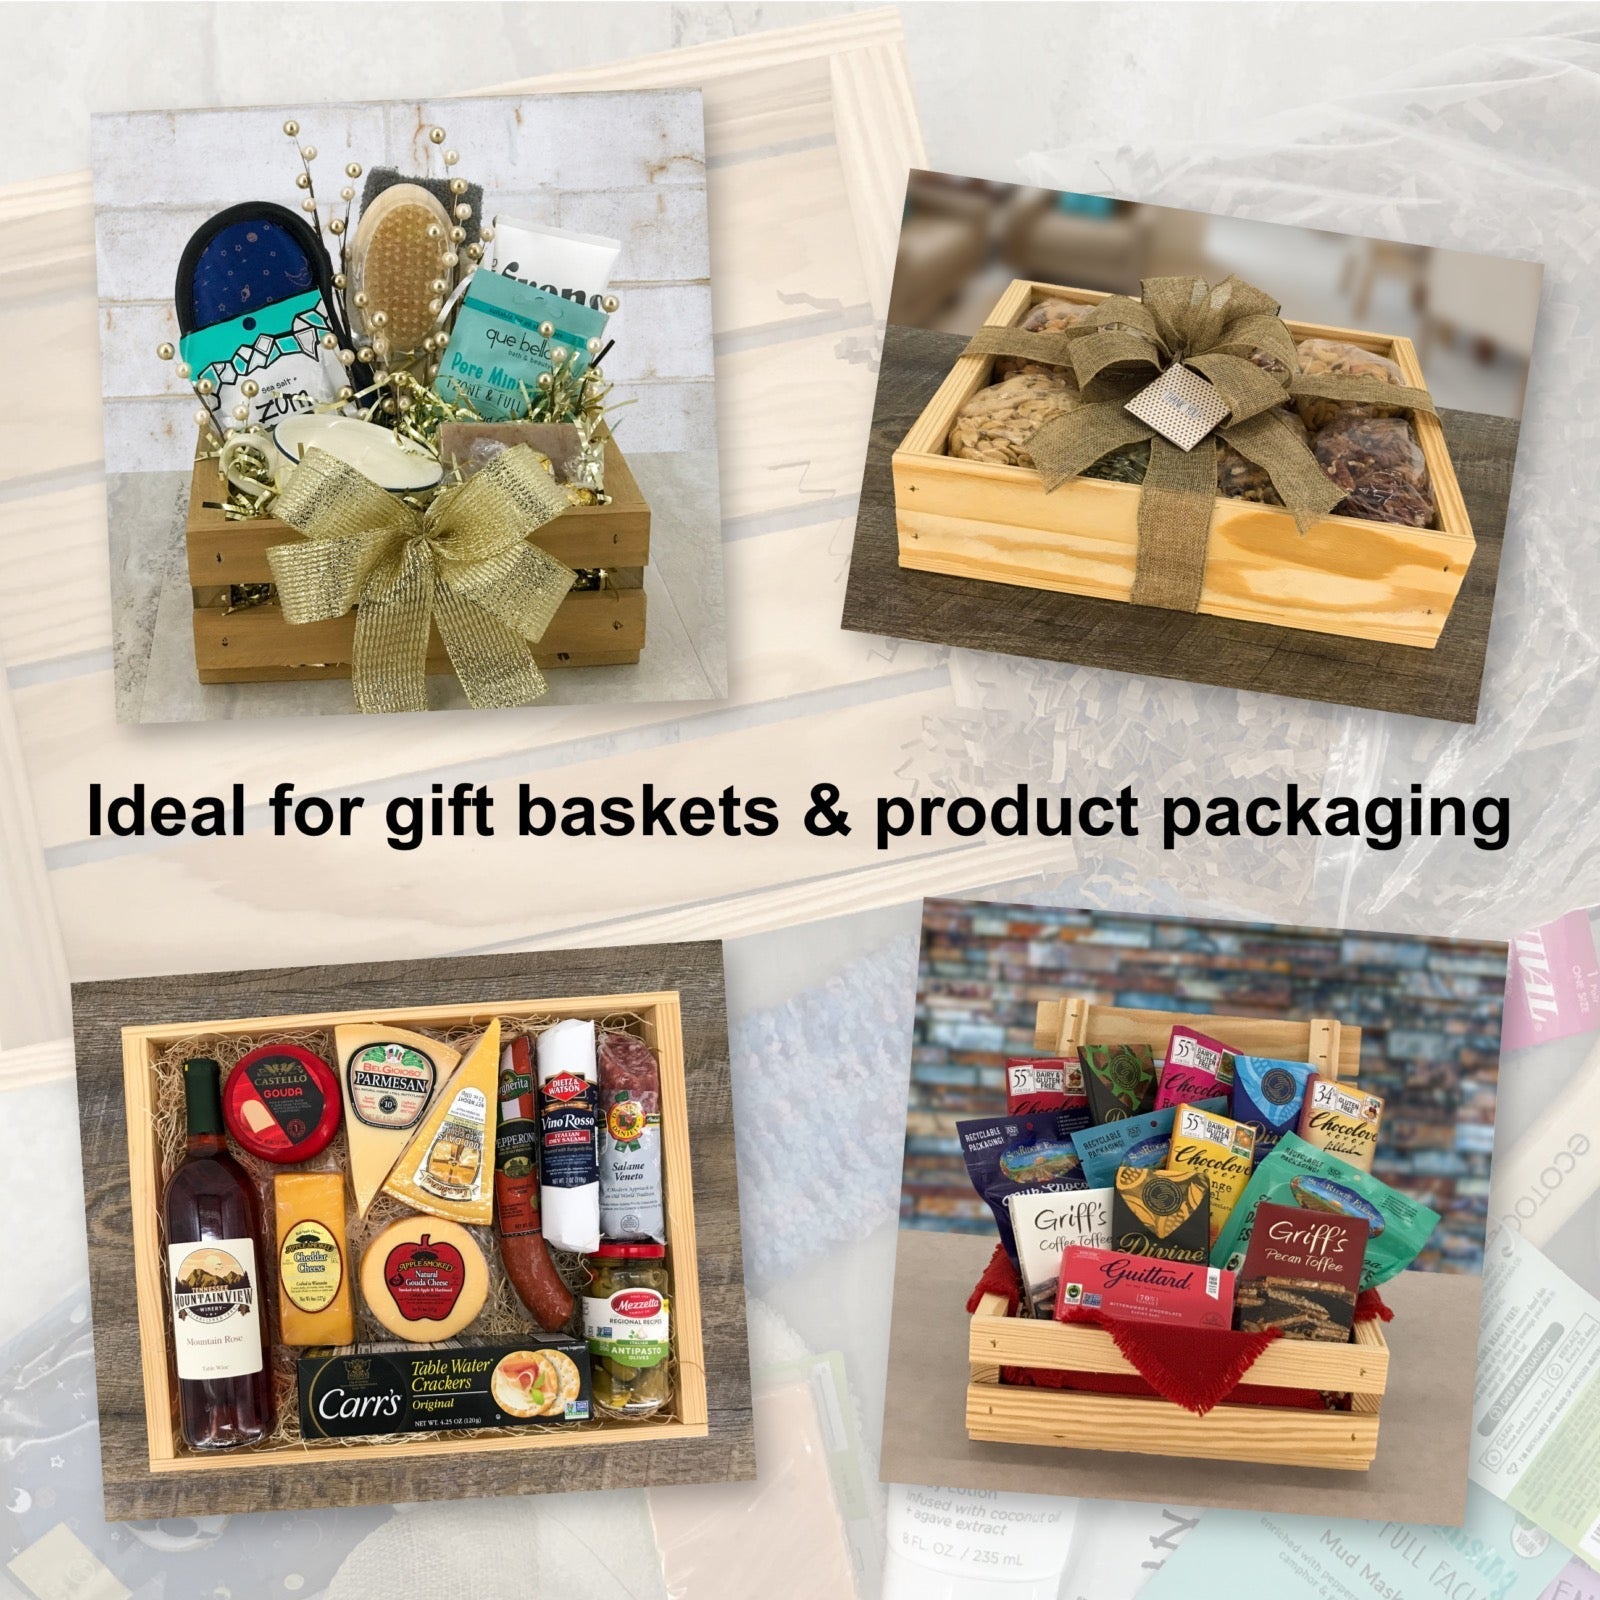 Ideal for gift baskets and product packaging, B2-10.375-7.875-4.3125-ST-NW-LL, 6-B2-10.375-7.875-4.3125-ST-NW-LL, 12-B2-10.375-7.875-4.3125-ST-NW-LL, 24-B2-10.375-7.875-4.3125-ST-NW-LL, 48-B2-10.375-7.875-4.3125-ST-NW-LL, 96-B2-10.375-7.875-4.3125-ST-NW-LL